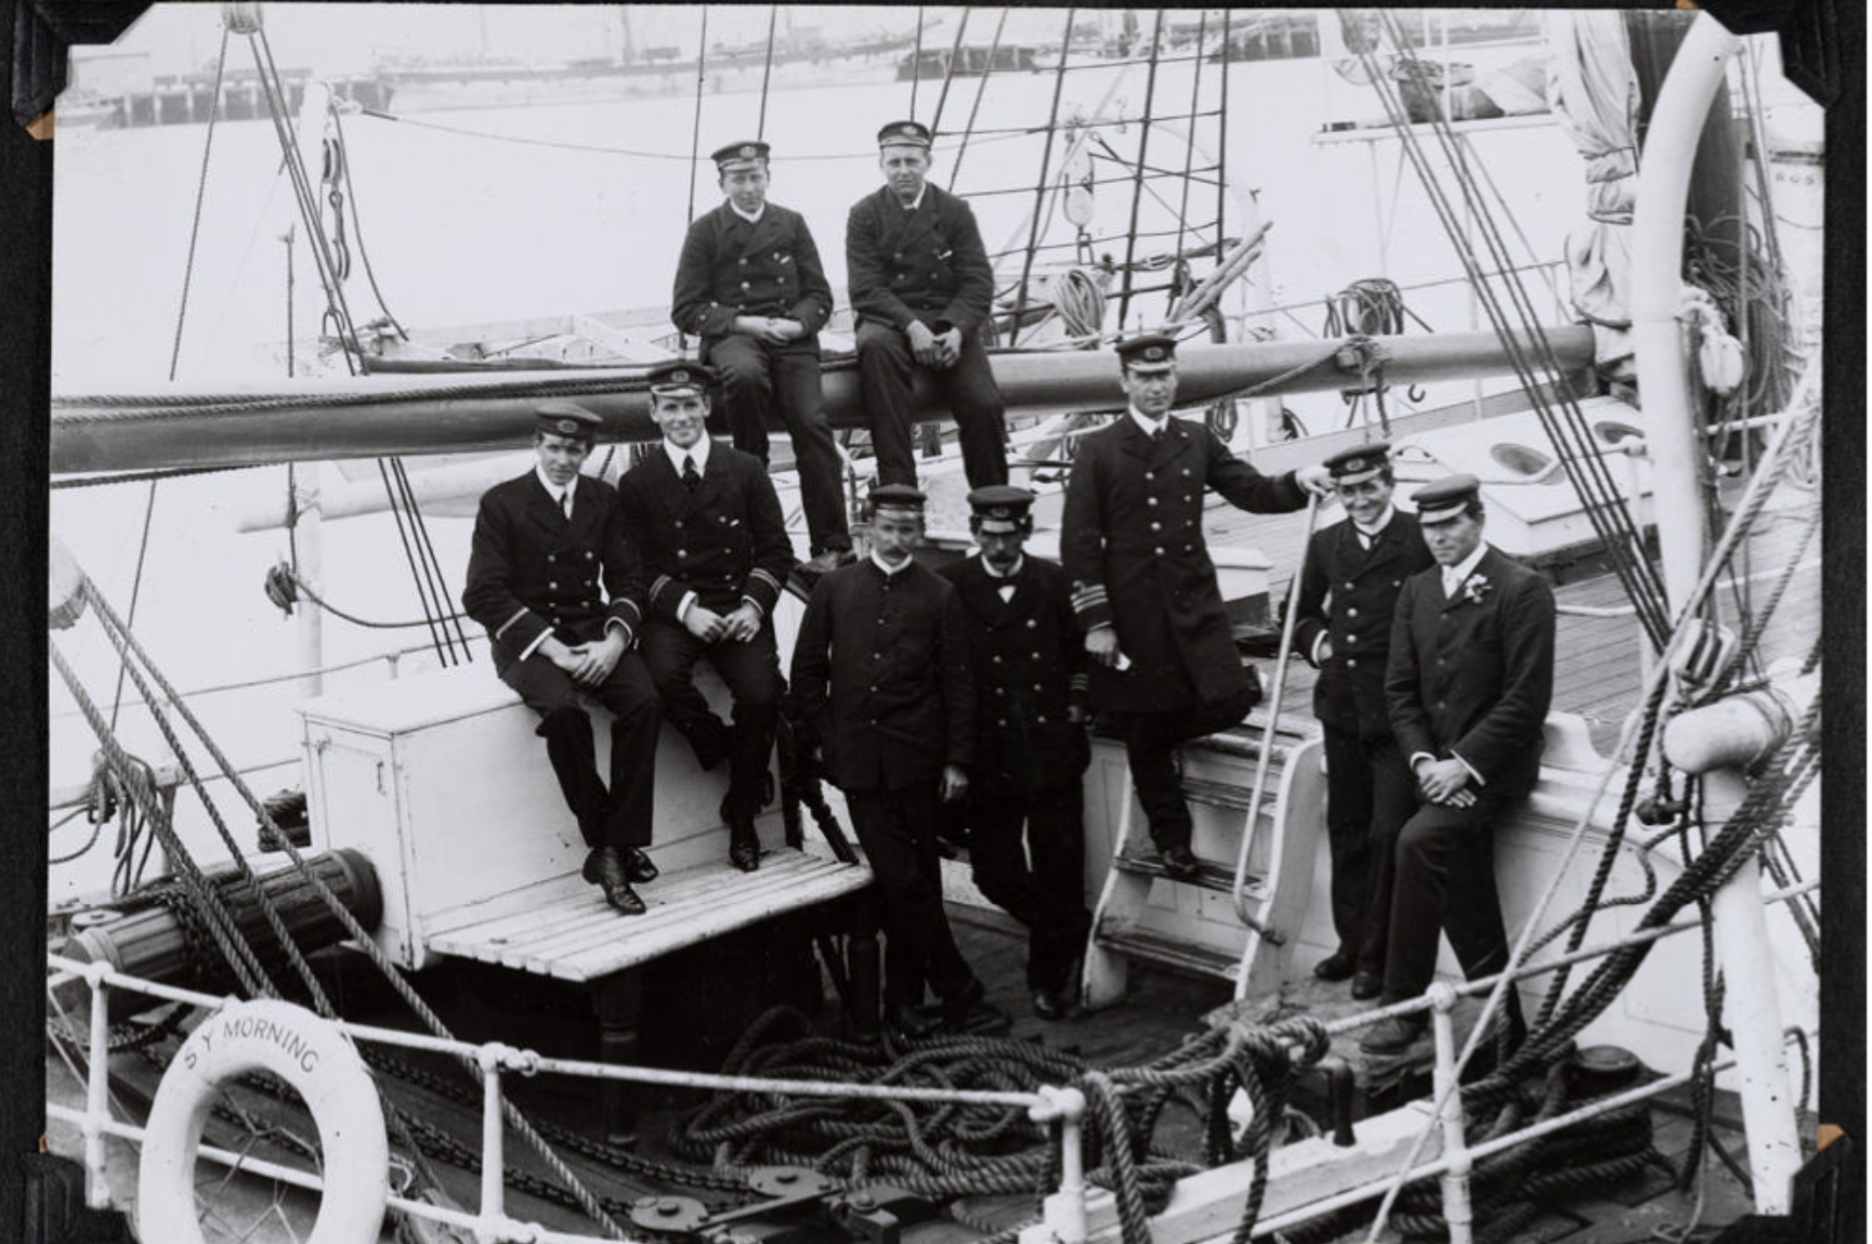 14985 37 Crew on deck of the ‘Discovery’ in berth at Lyttelton, 1901